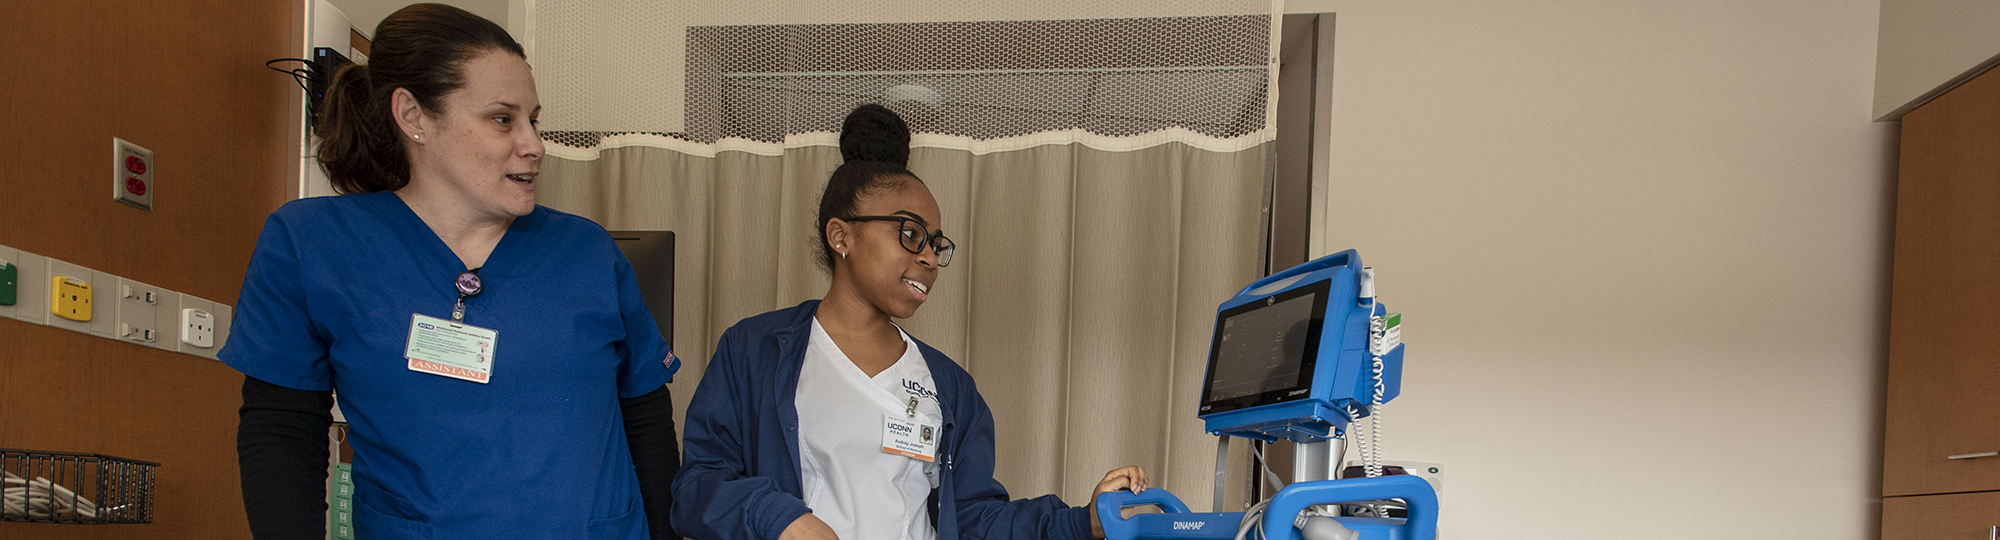 A student checks a monitor in a patient's room